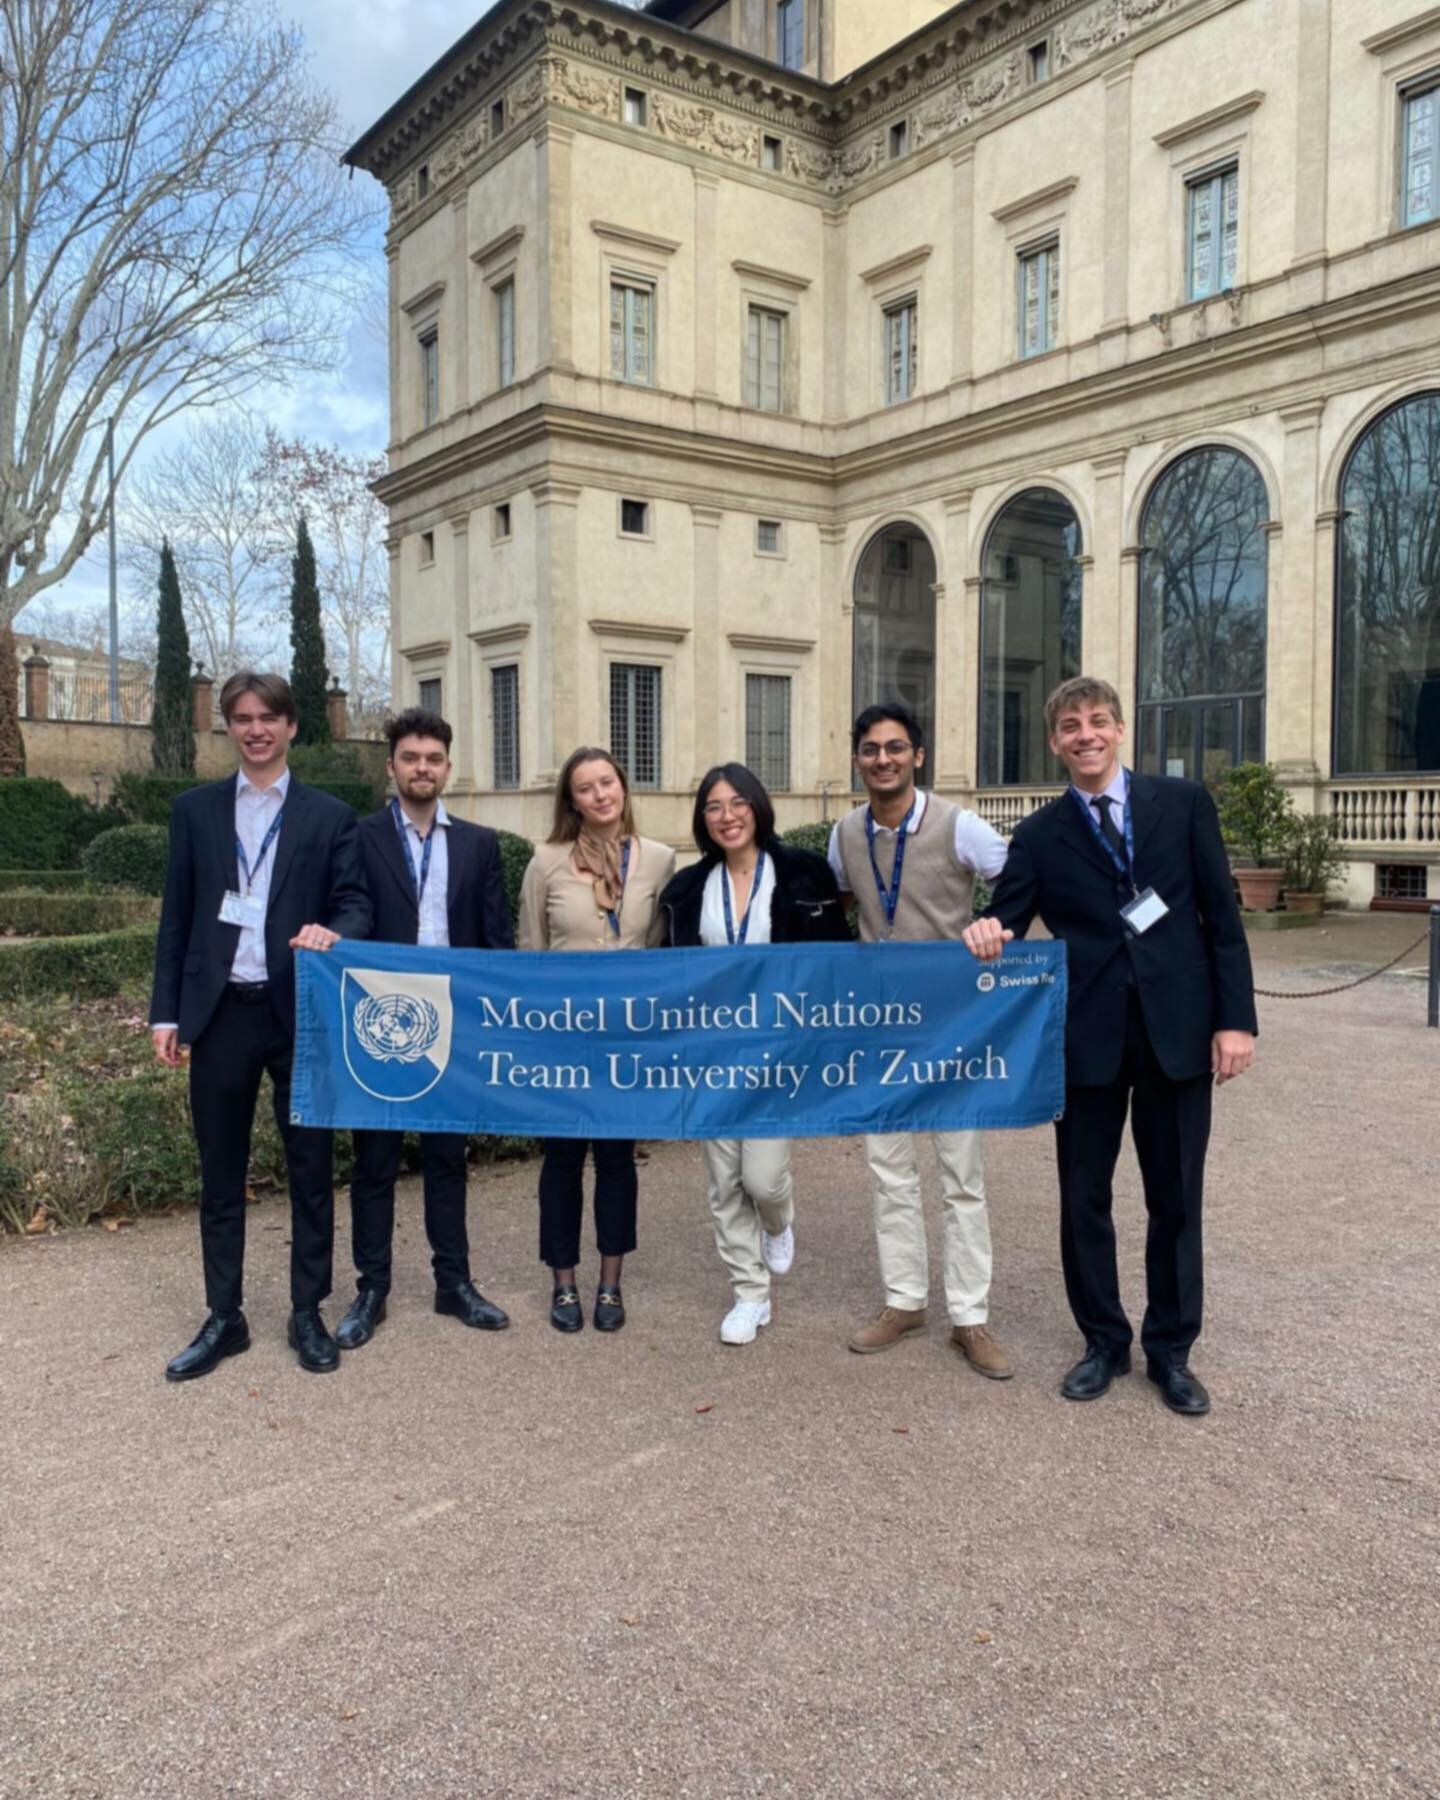 - JCUMUN 2024 Recap -

From February 22nd to 25th, the MUN Team UZH had the privilege of participating in the John Cabot University Model United Nations conference held in Rome!

During the Opening Ceremony, we were honoured to listen to a speech fro